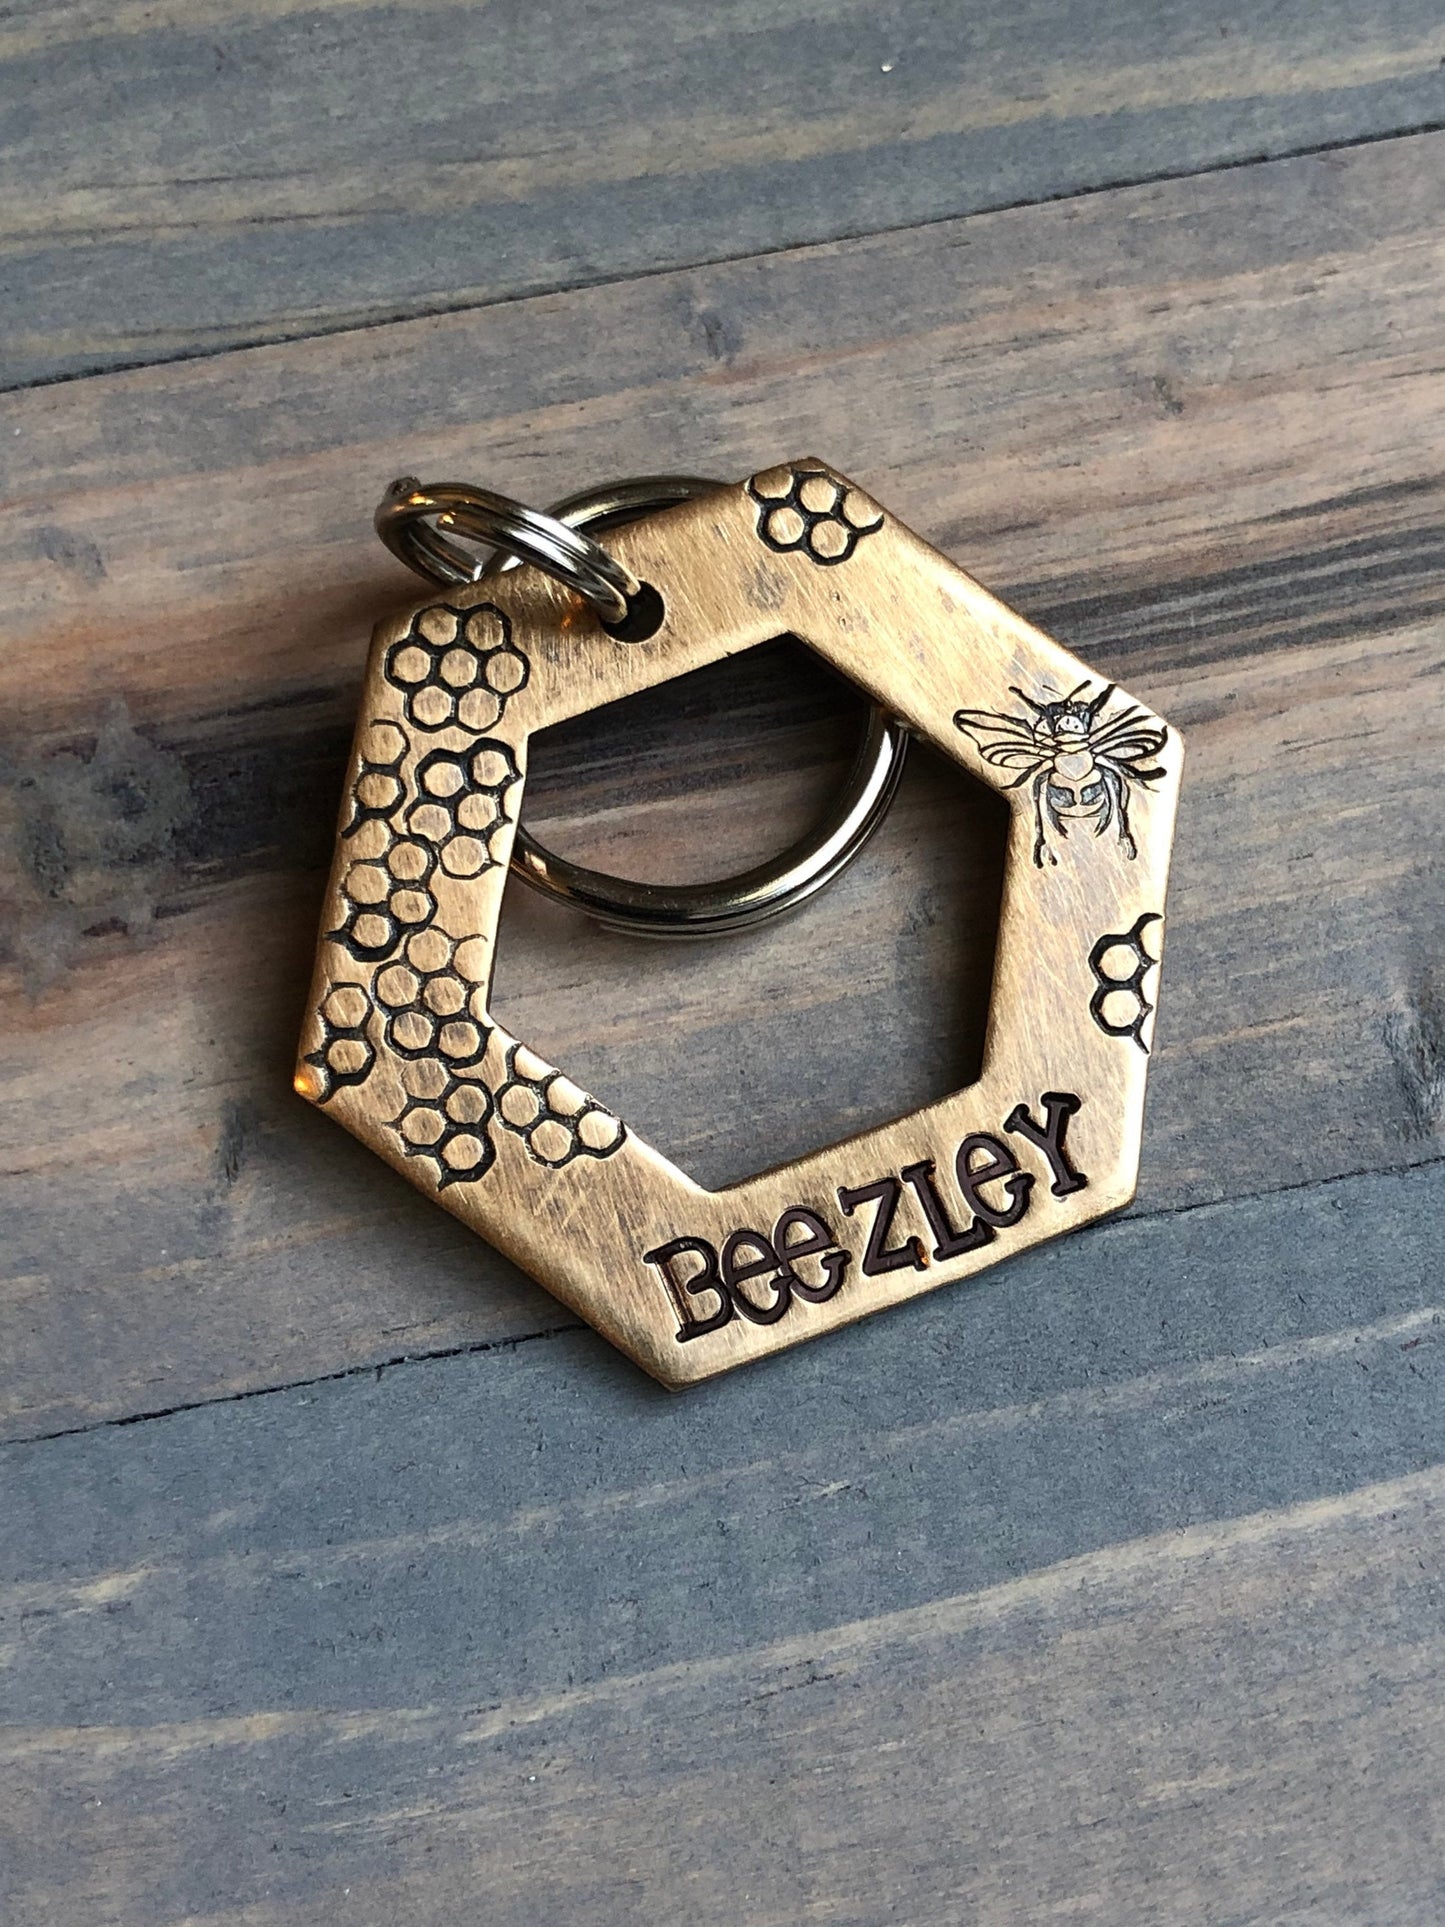 Custom Queen Bee Dog Tag, Hand Stamped washer Pet ID, Personalized Dog Tag for Dog, honey bee, honey comb, bee hive